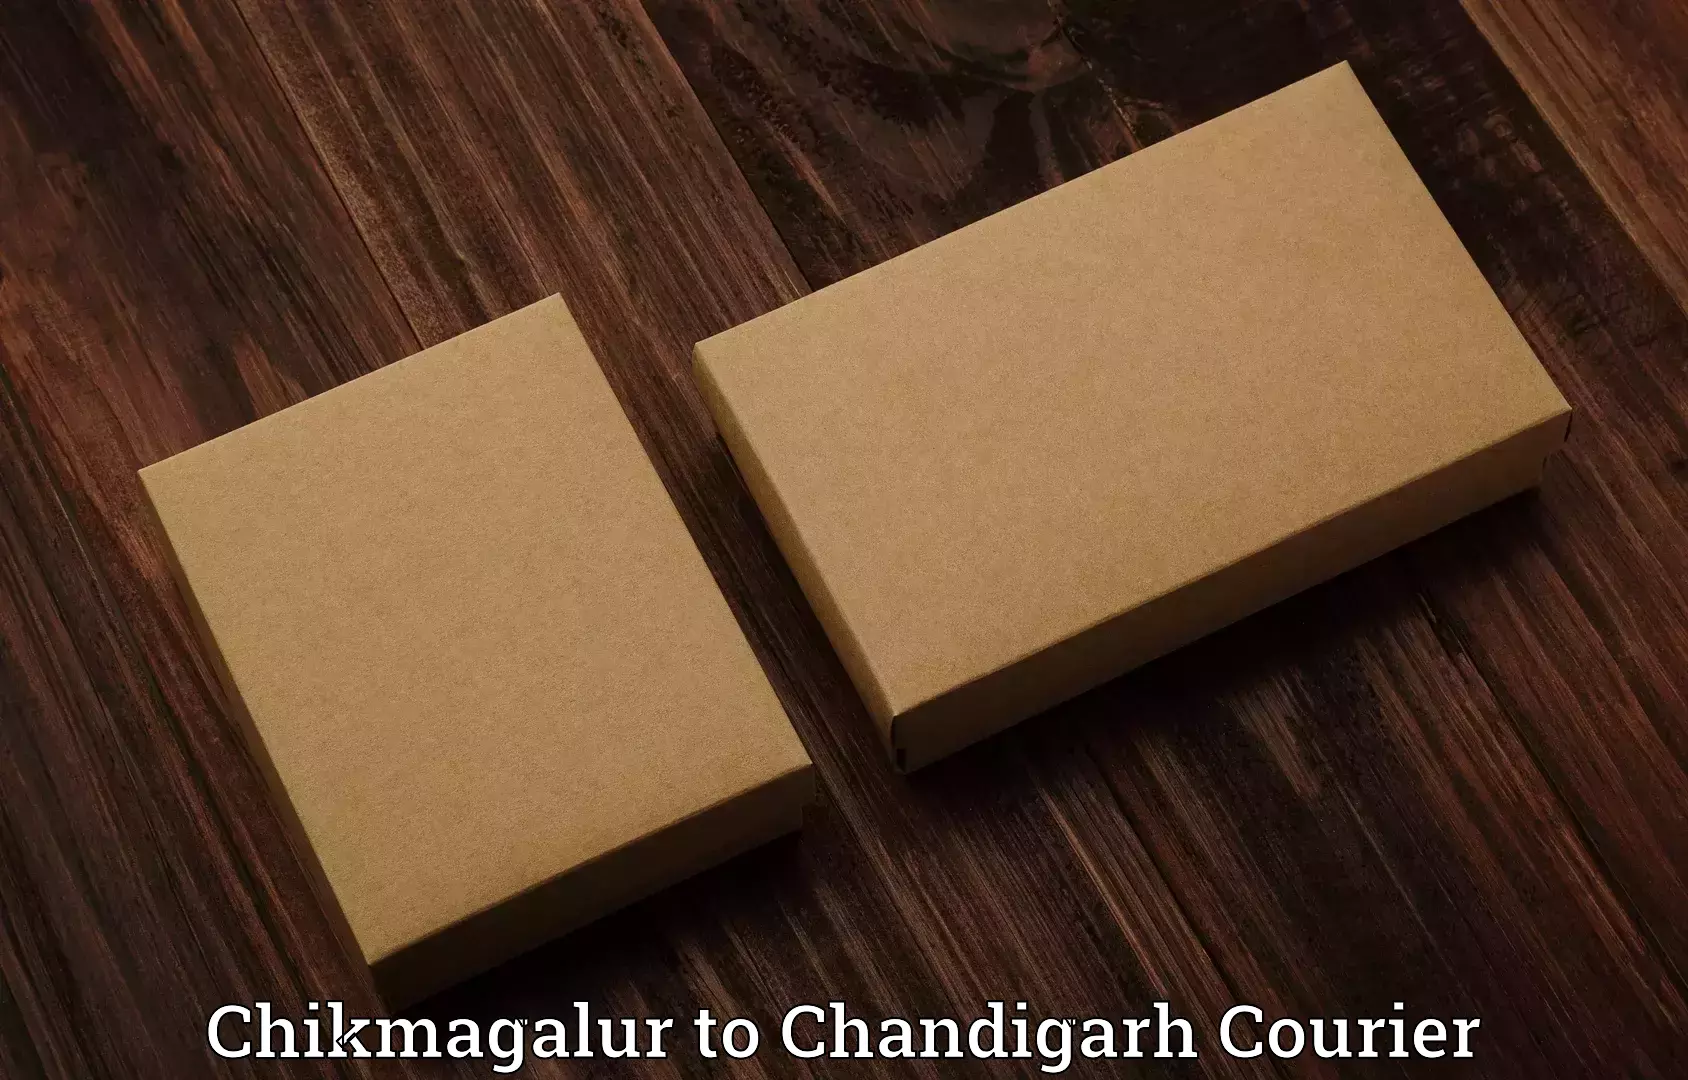 Baggage delivery optimization Chikmagalur to Chandigarh